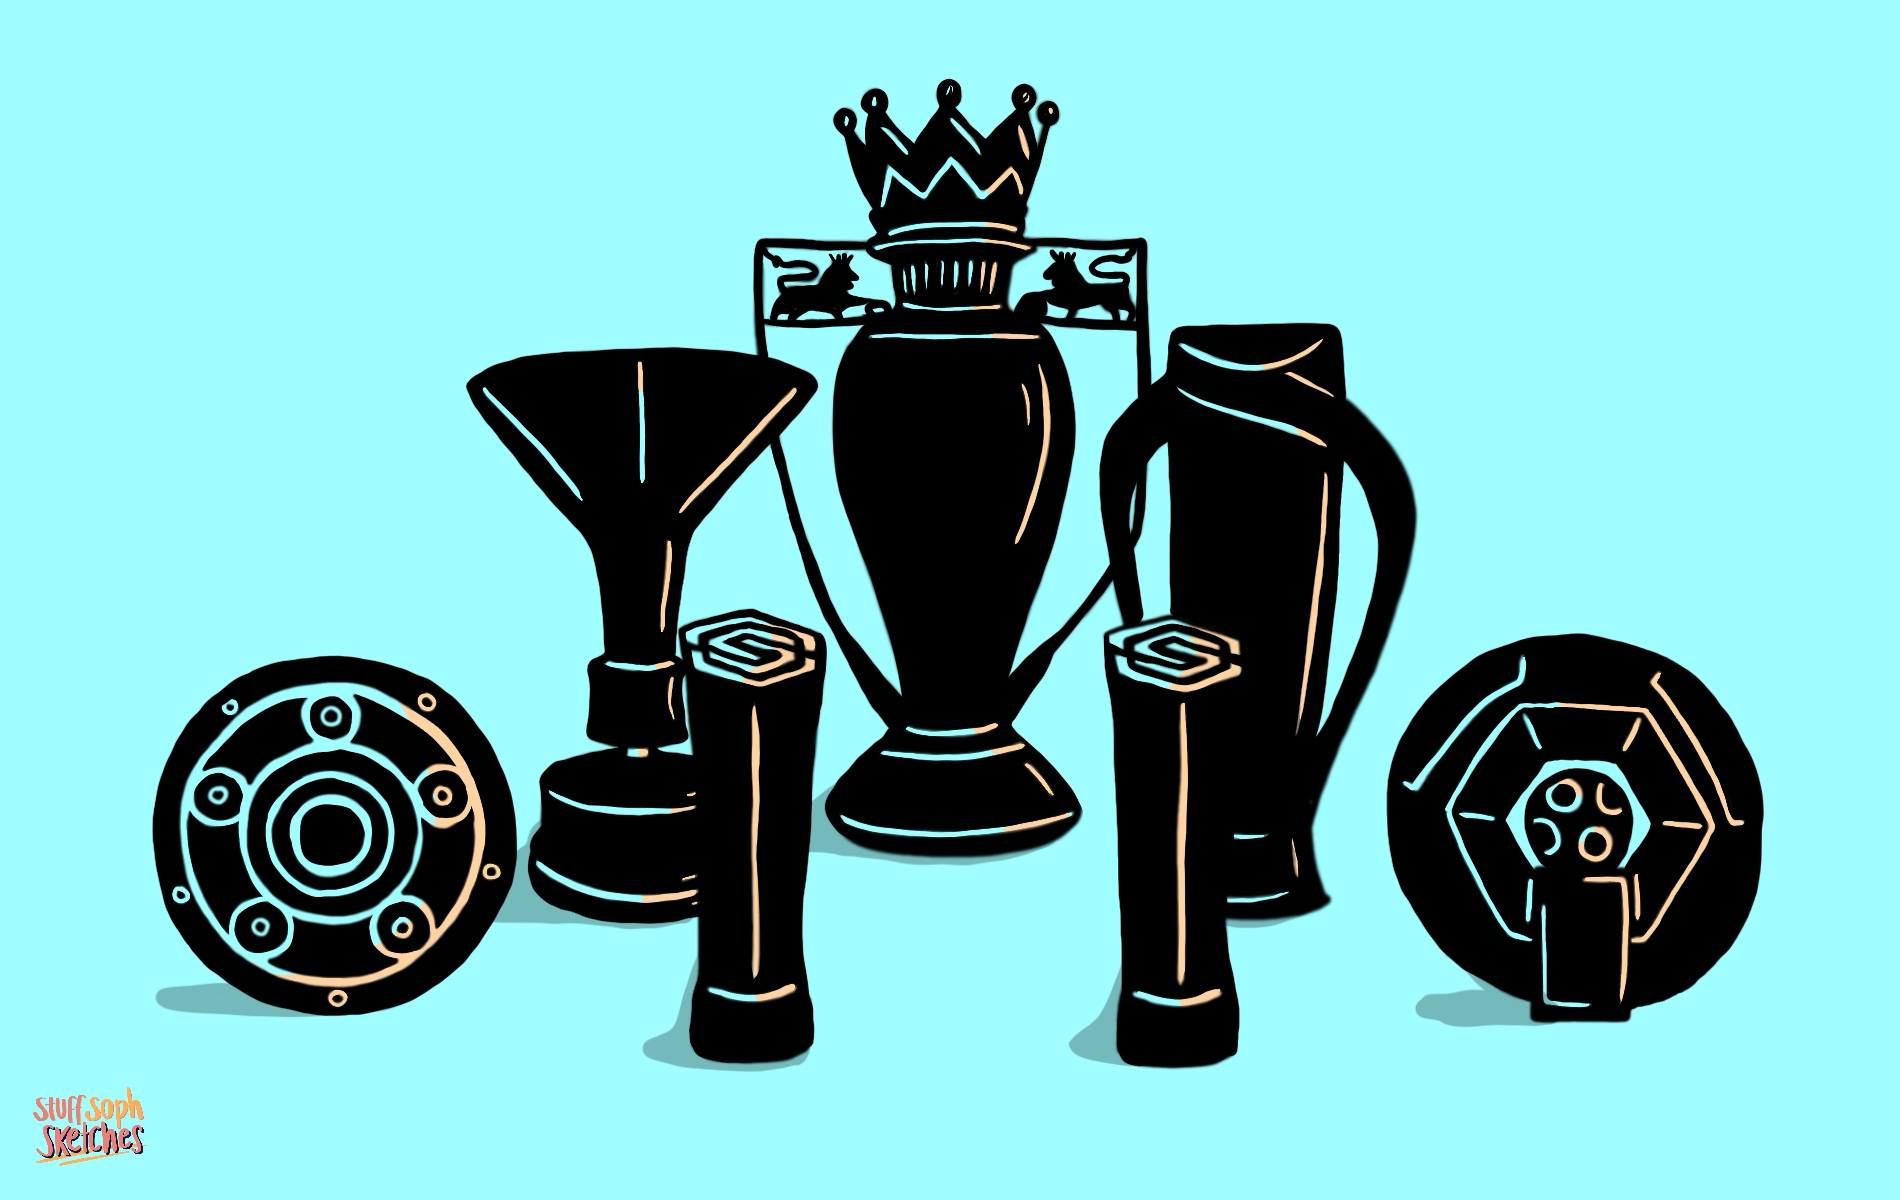 6 major trophies on a blue background